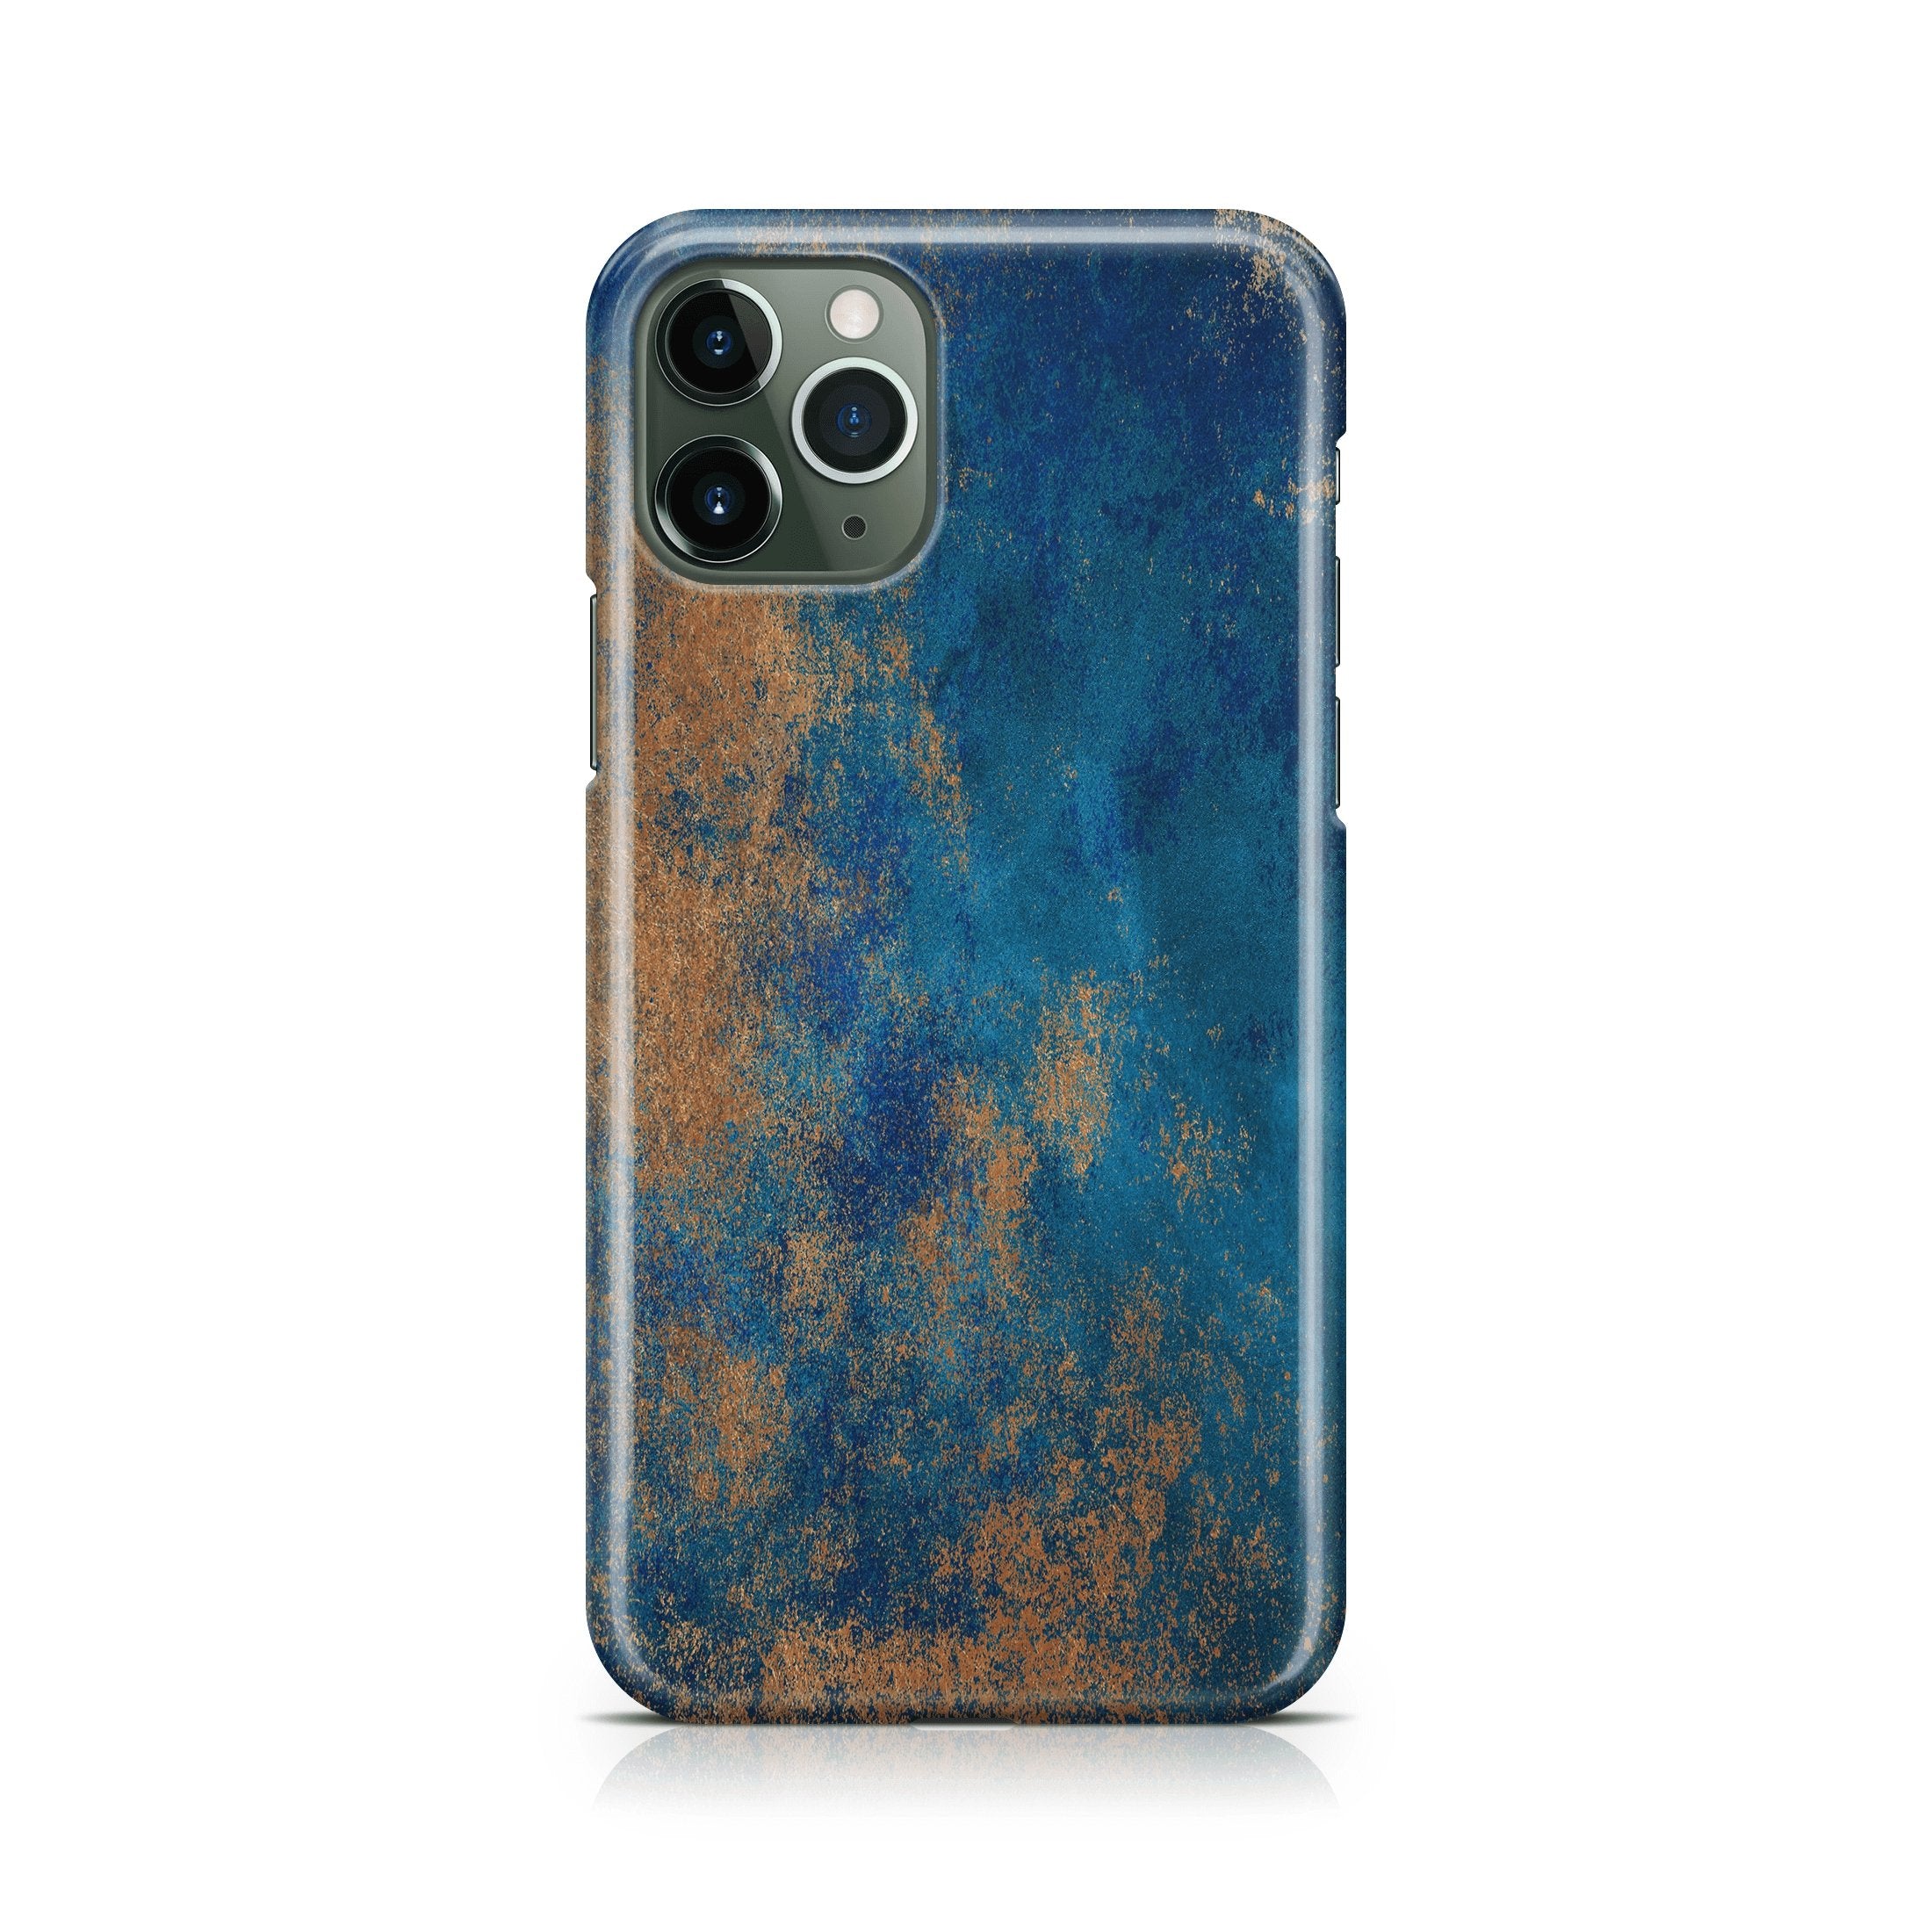 Shanty Rust - iPhone phone case designs by CaseSwagger